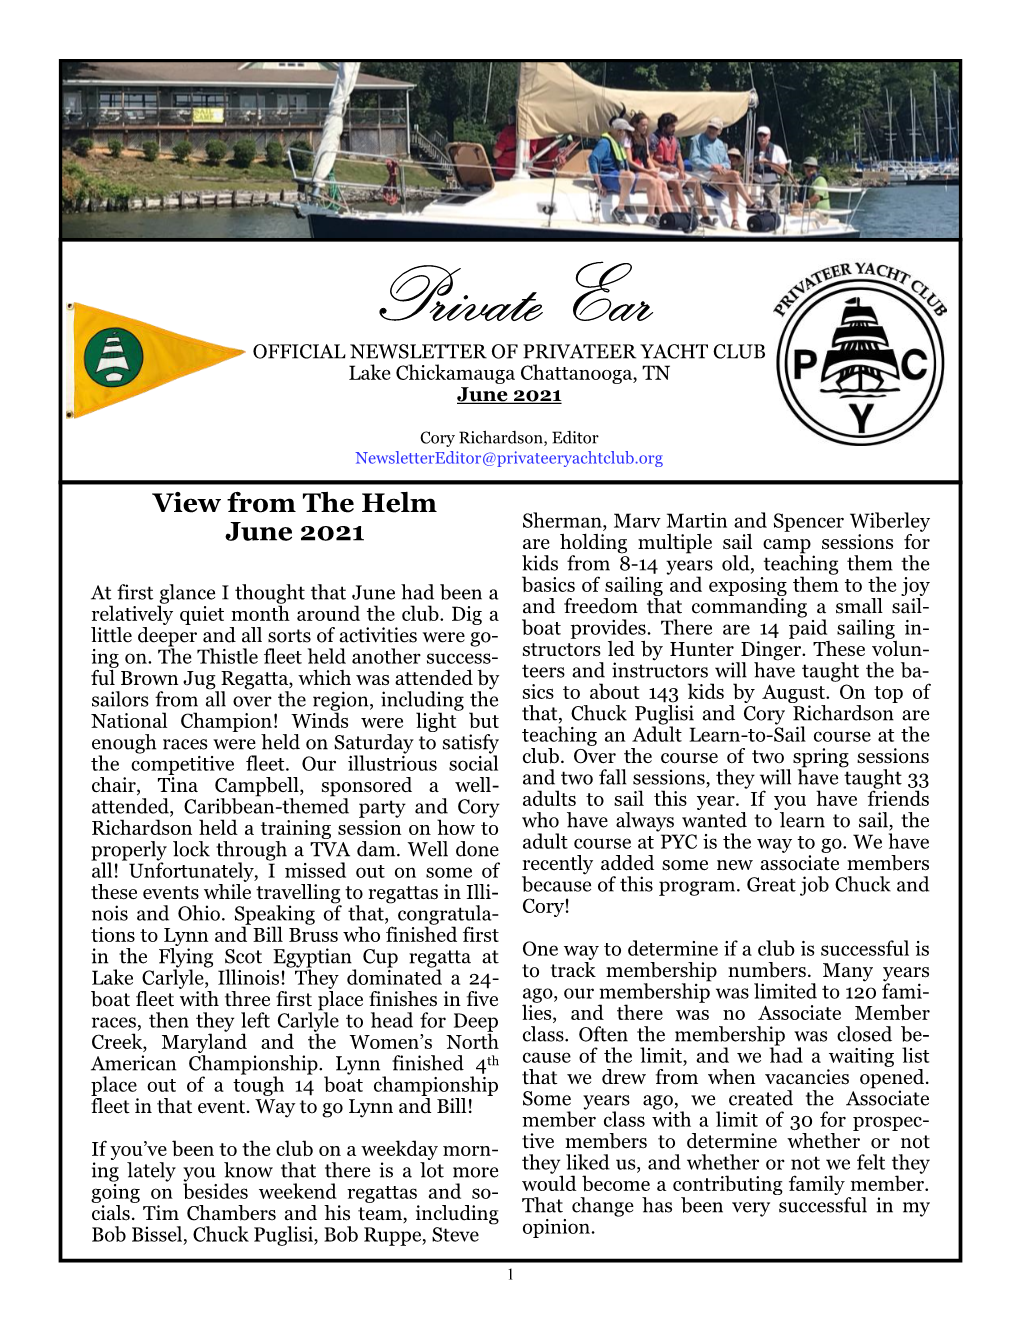 Private Ear OFFICIAL NEWSLETTER of PRIVATEER YACHT CLUB Lake Chickamauga Chattanooga, TN June 2021